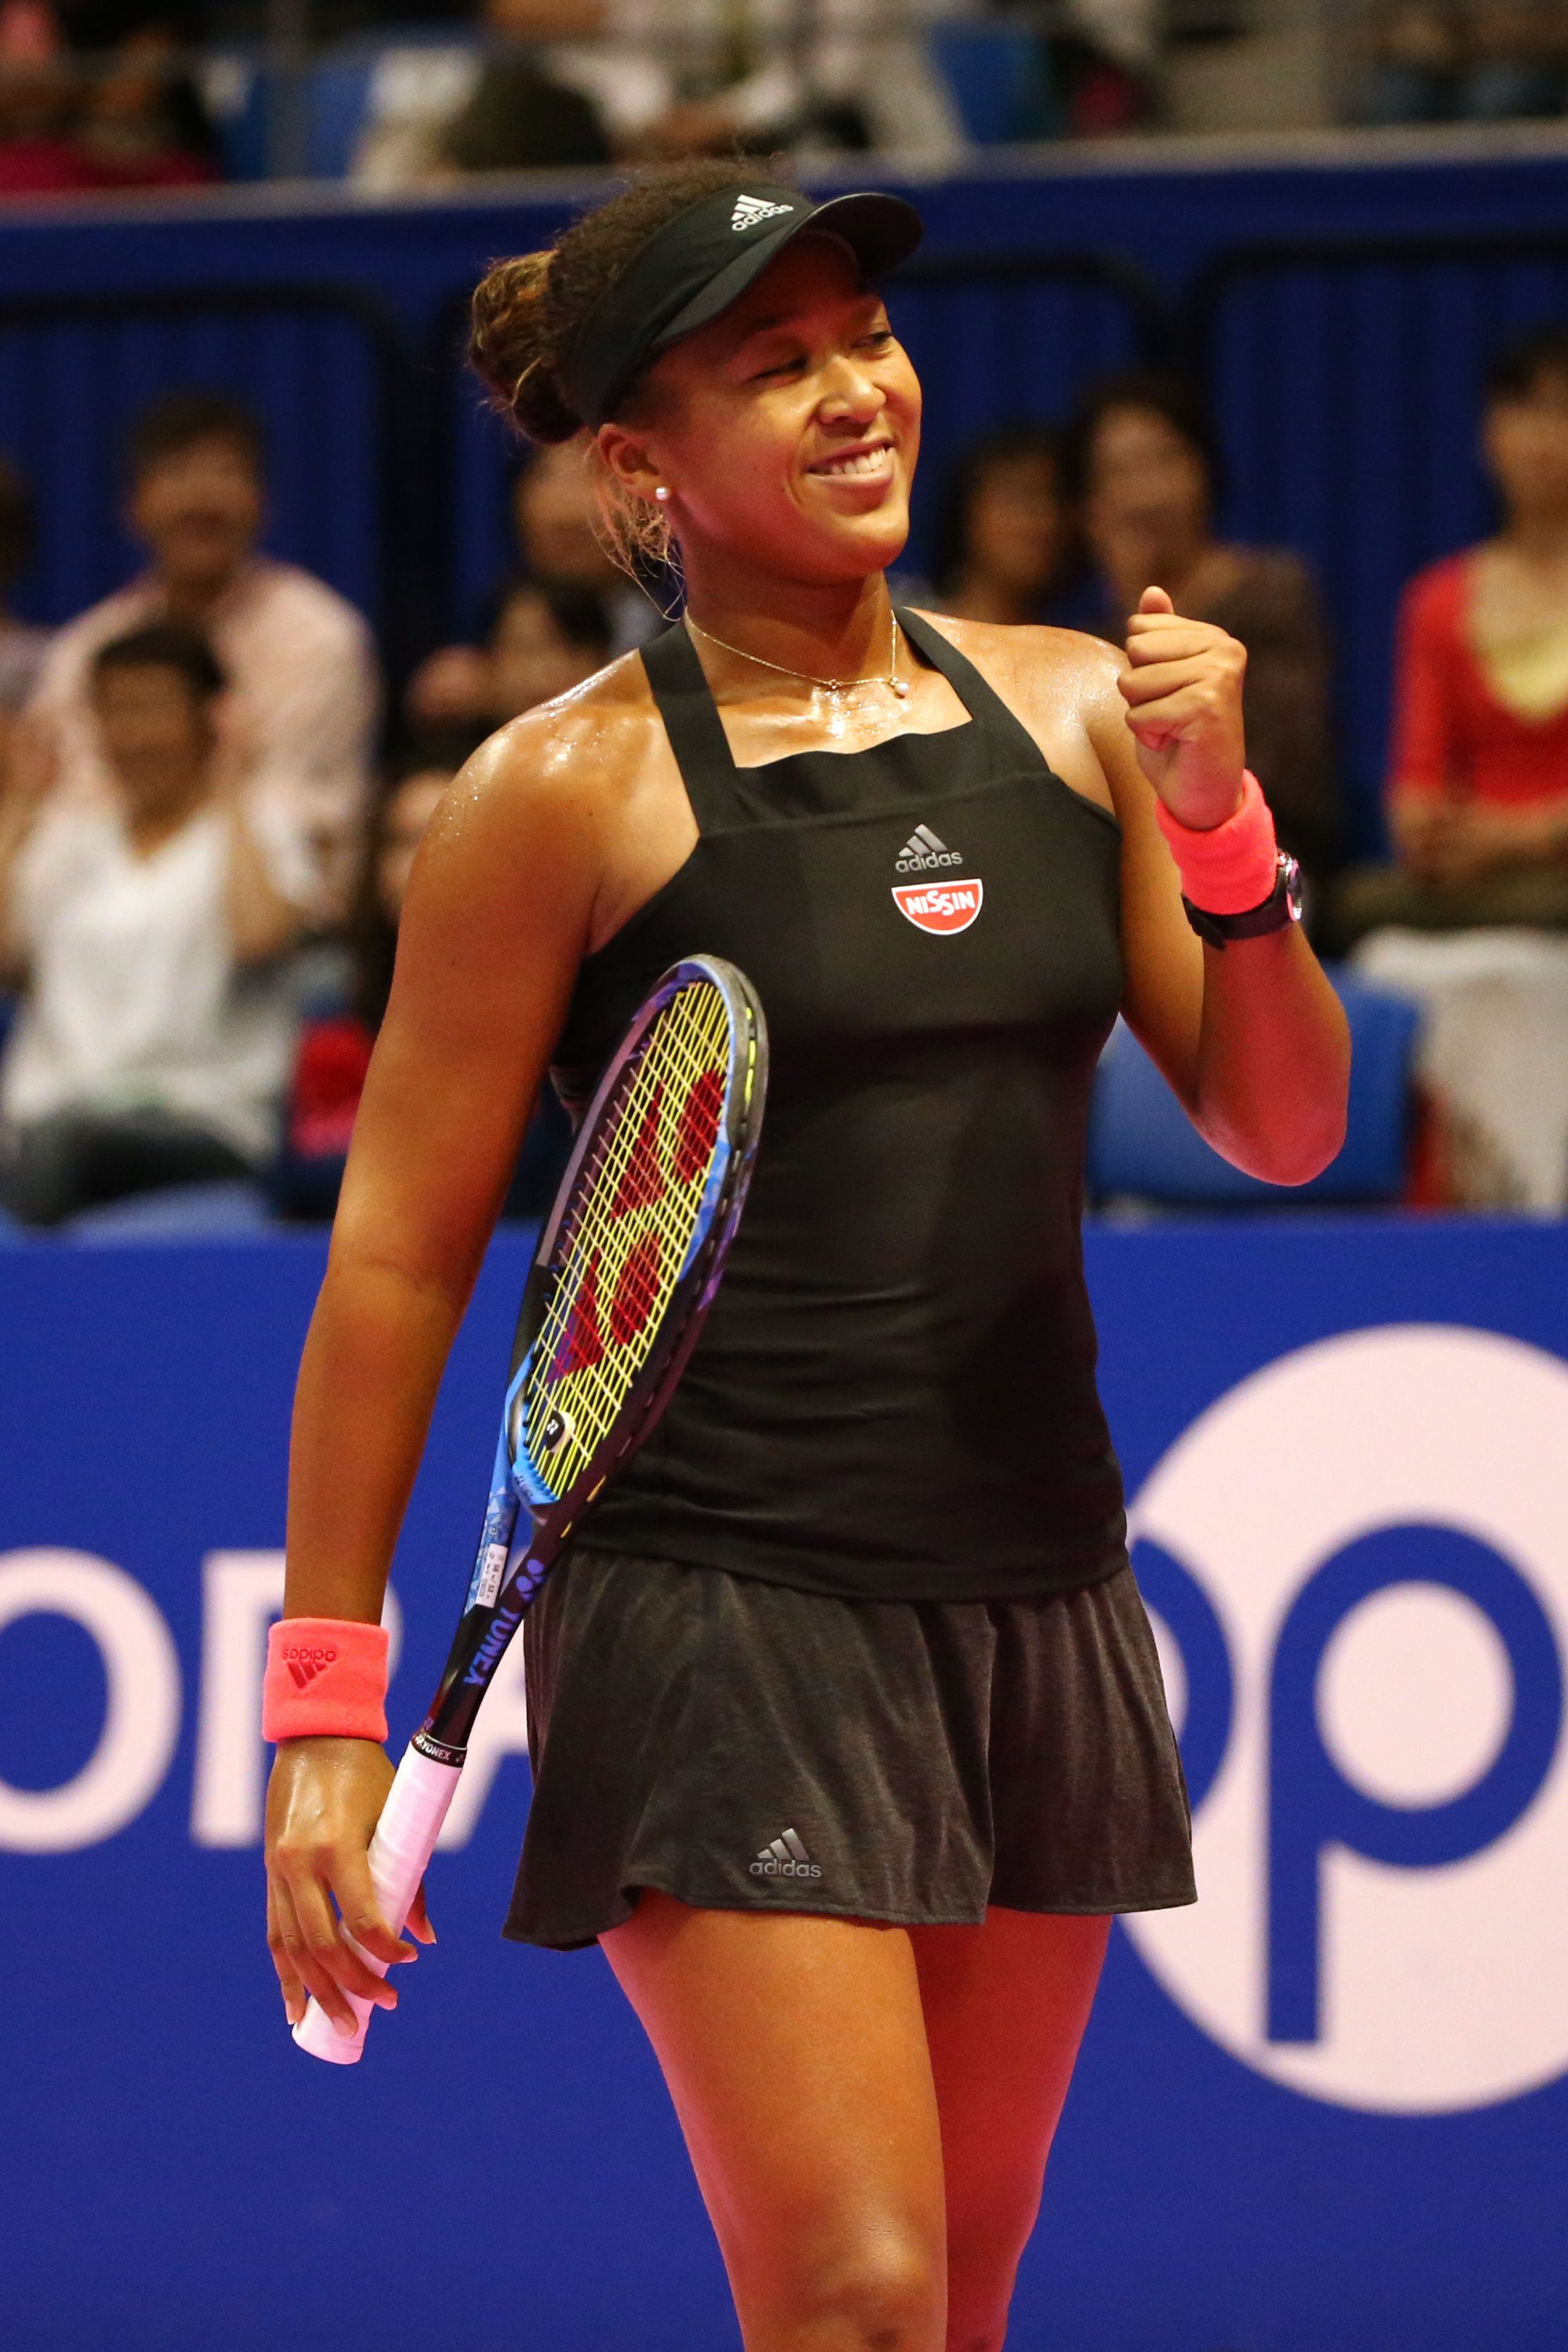 Naomi Osaka celebrating her victory in the singles second round match against Dominika Cibulkova on September 19, 2018 in Tokyo. | Photo: Getty Images